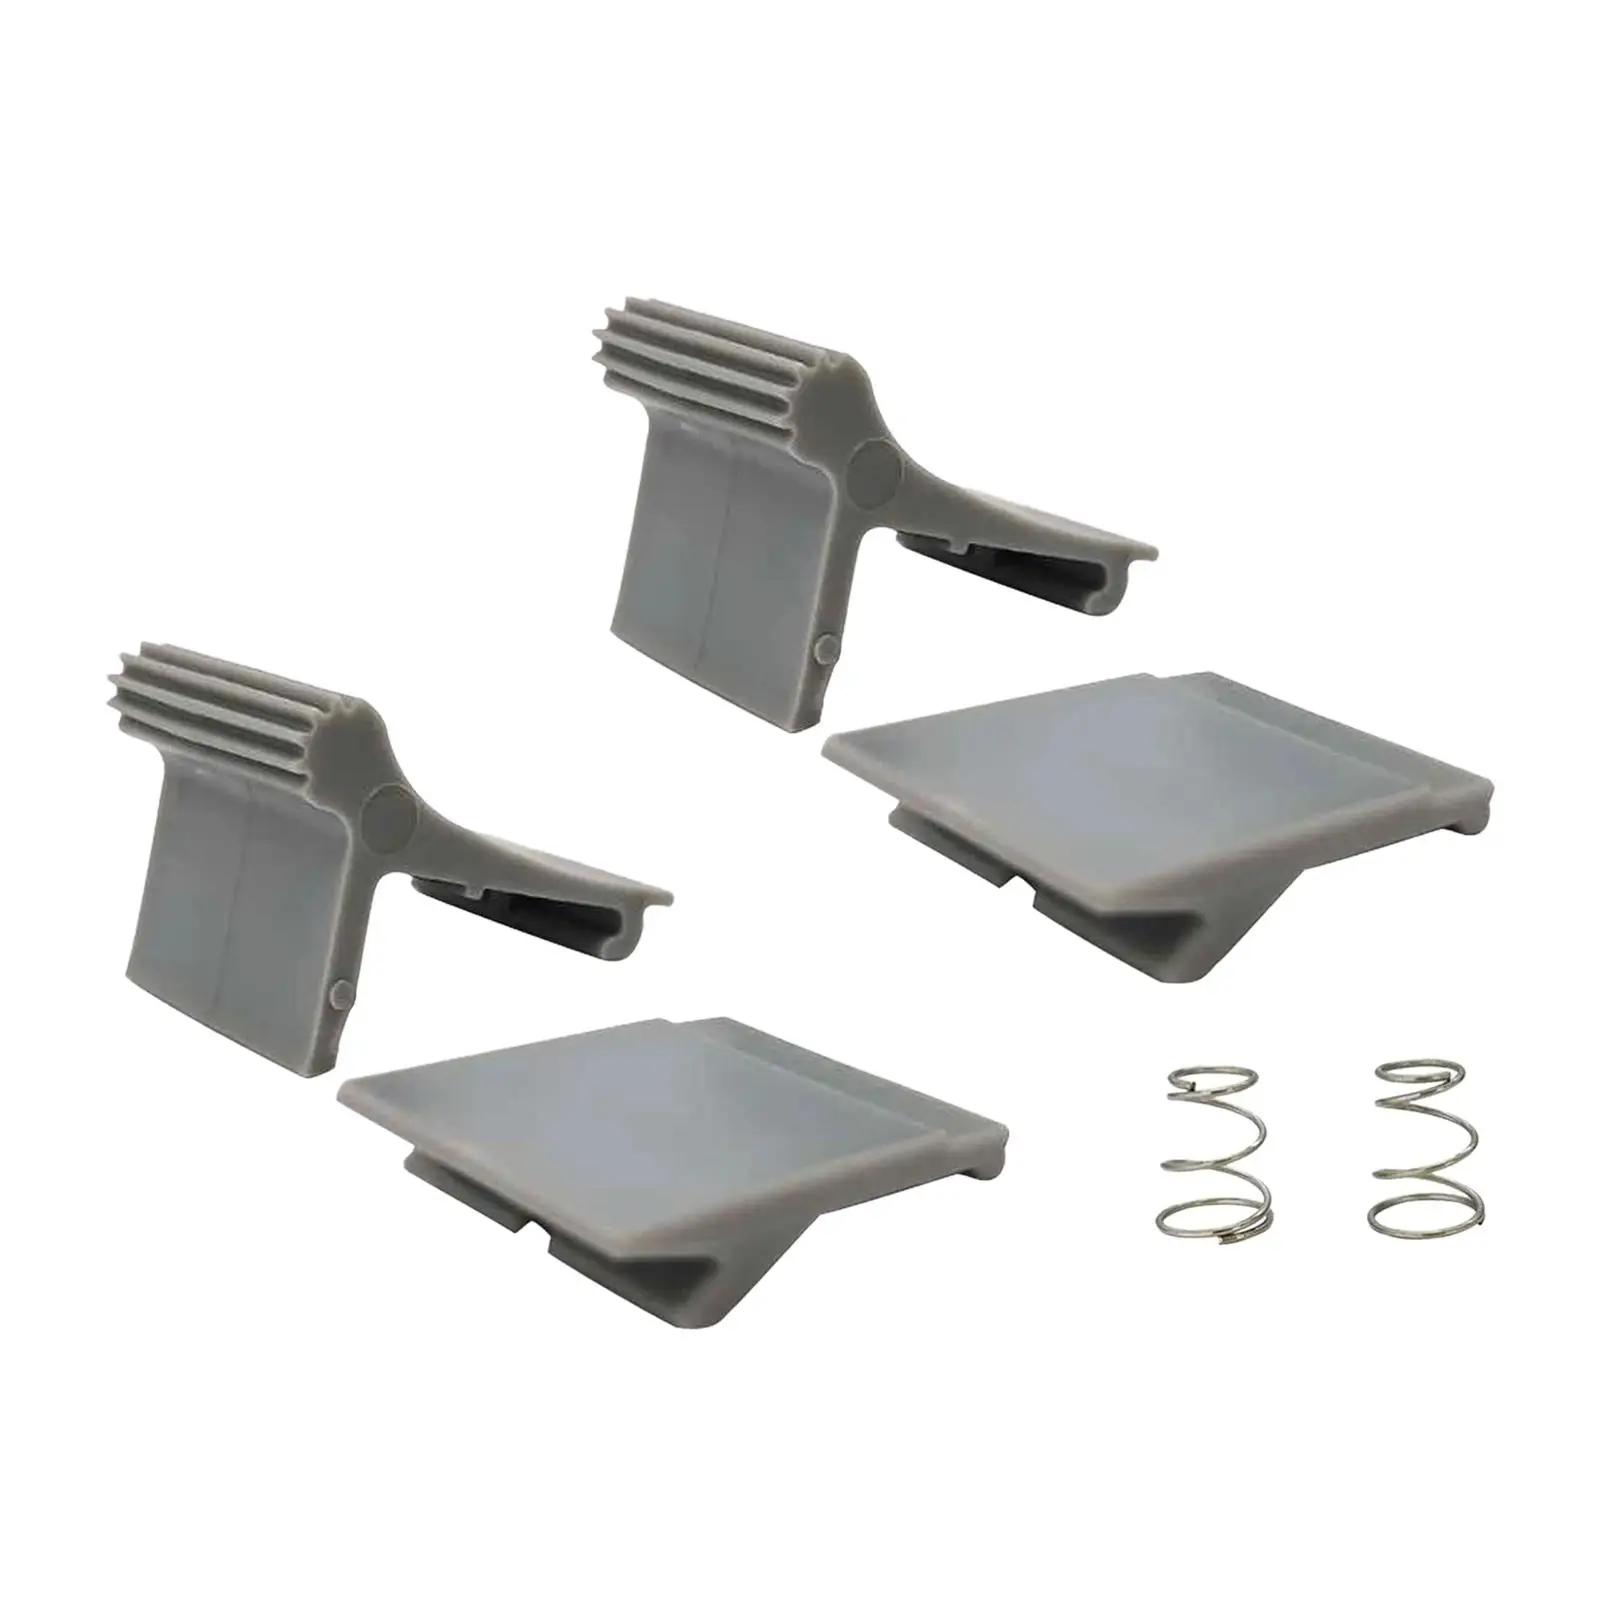 Awning Arm Slider Set Replacement Repair Parts Assembly with